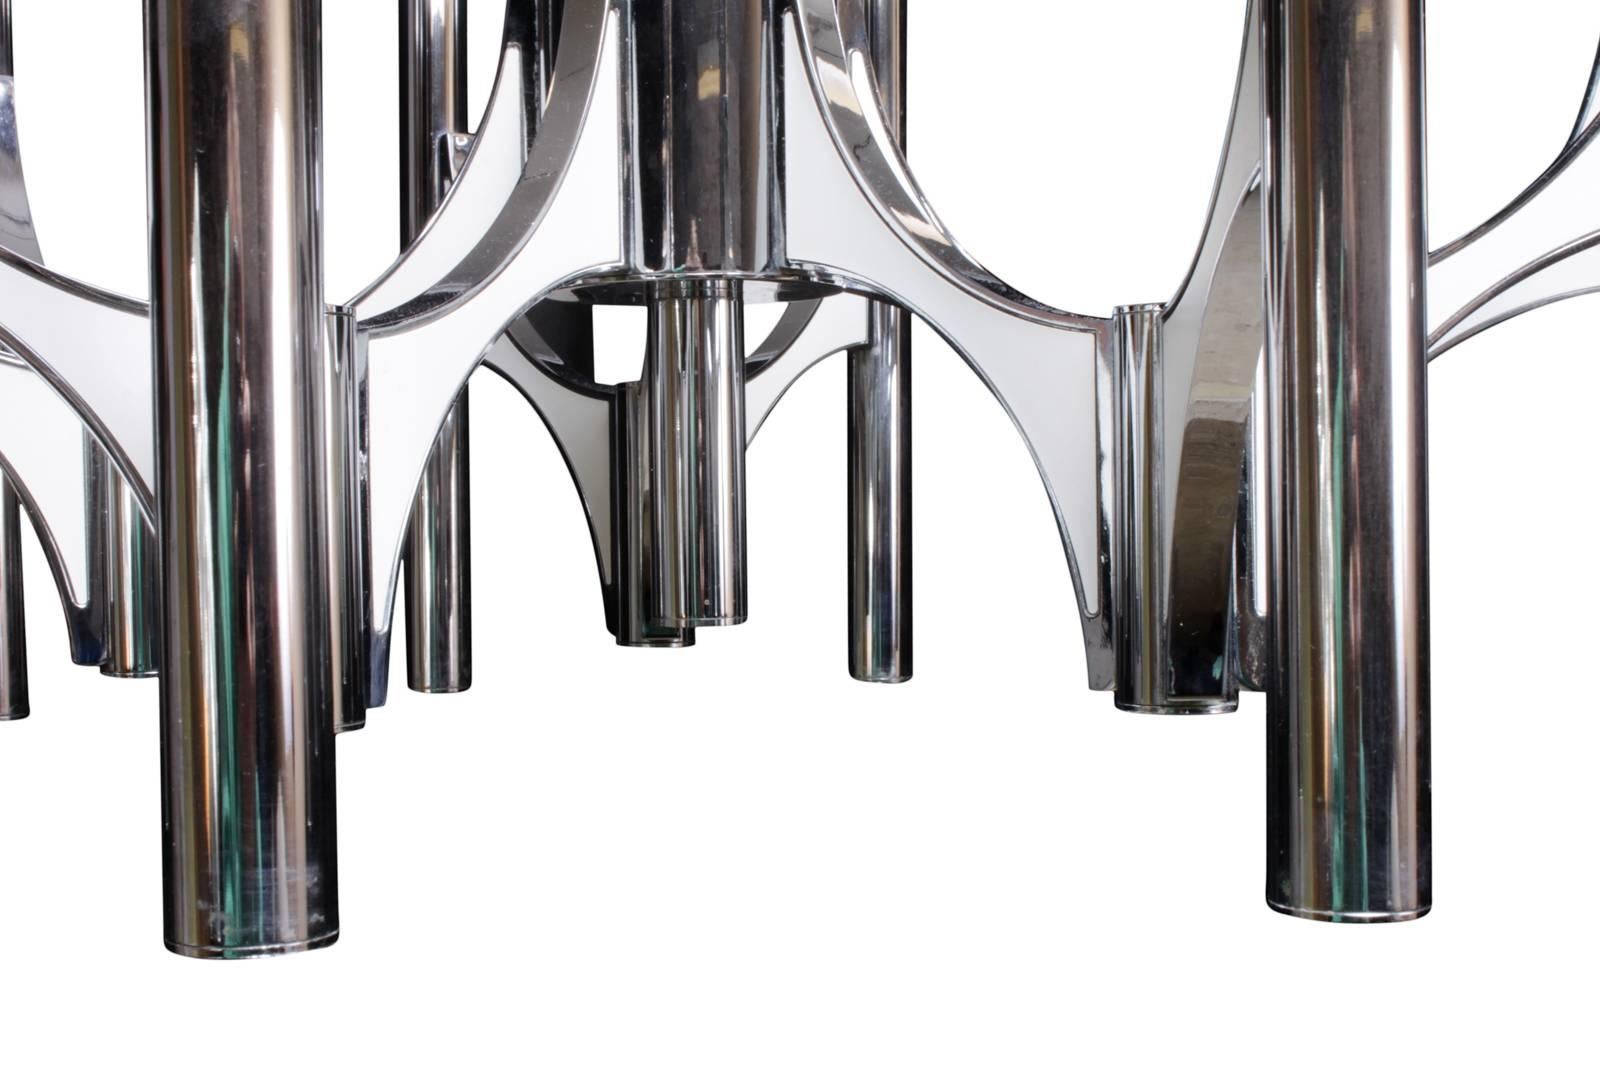 Midcentury chandelier ten-branch by Gaetano Sciolari
Italian, circa 1960s large cream and chrome chandelier with ten cylindrical lights arranged in a circular formation around a rod stem and flying buttress arms by Gaetano Sciolari. Makers Label in